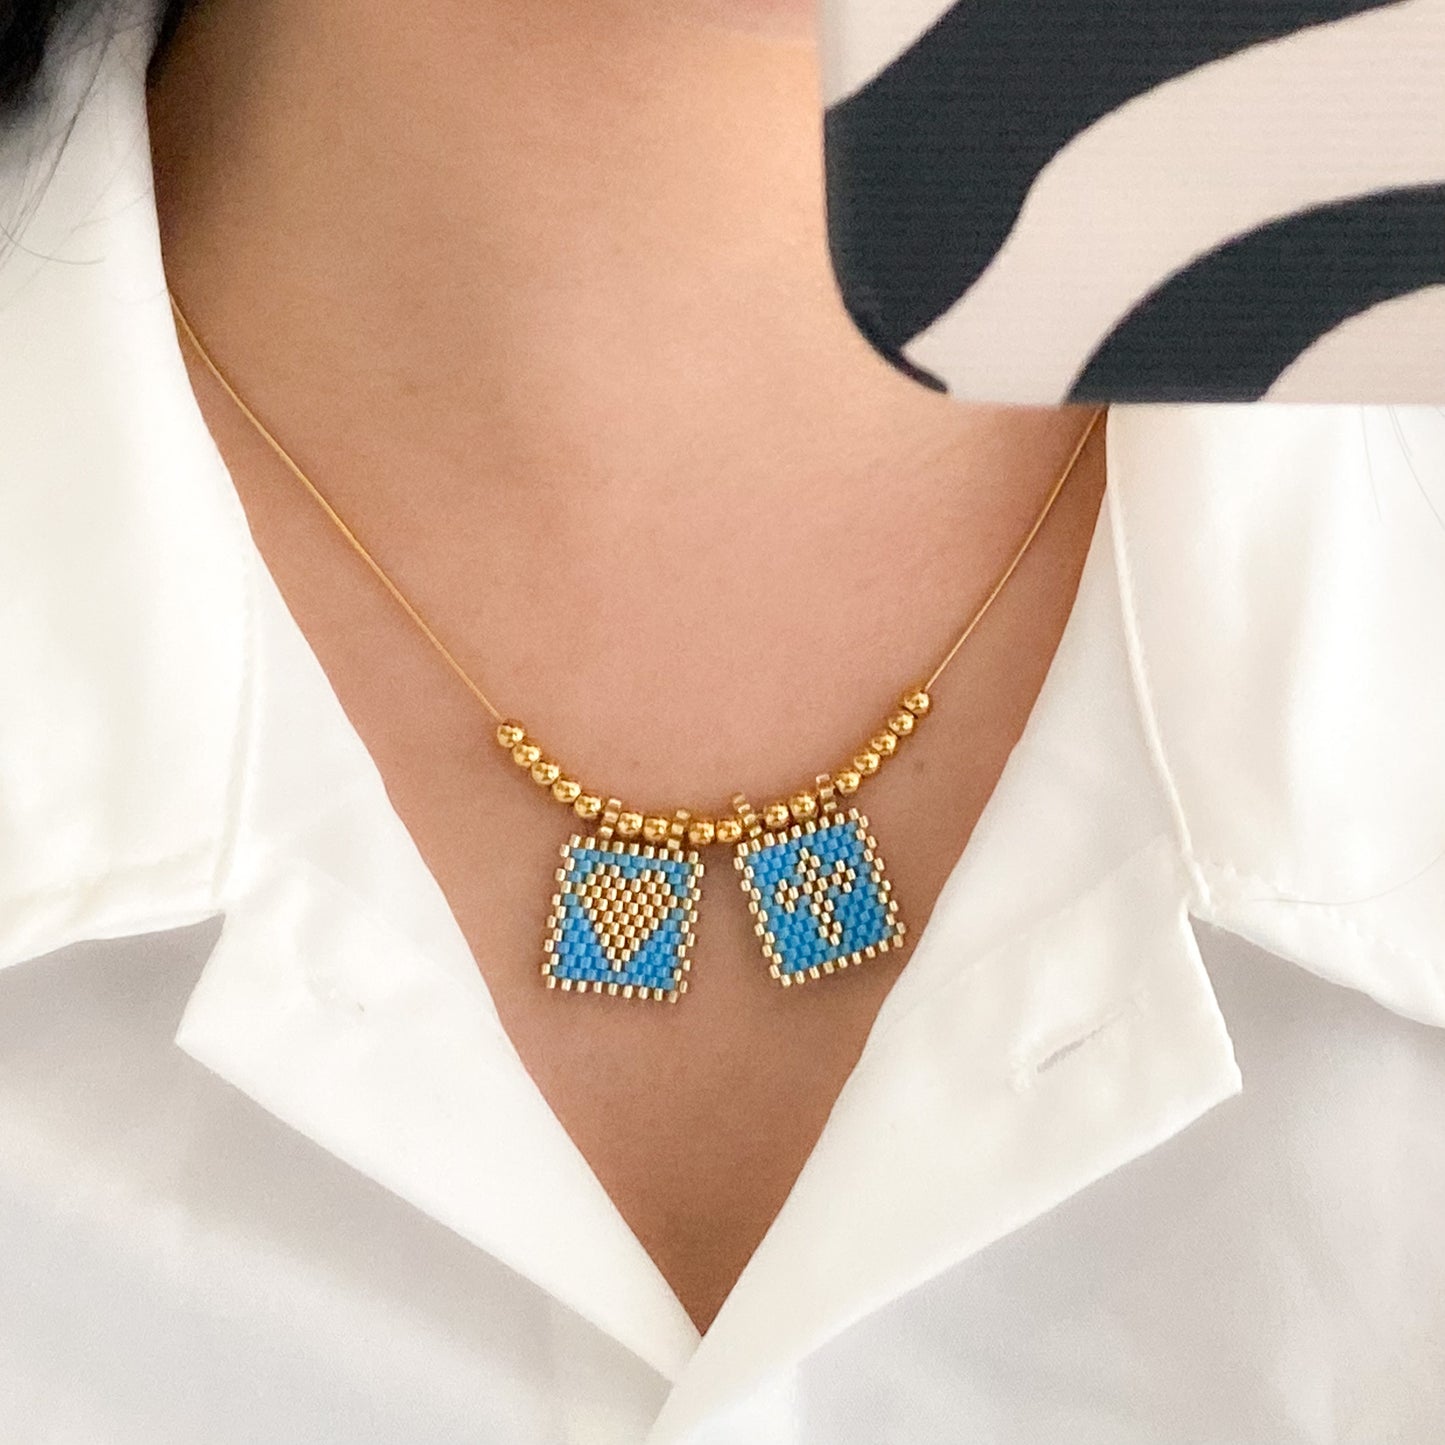 Sky blue with gold scapular